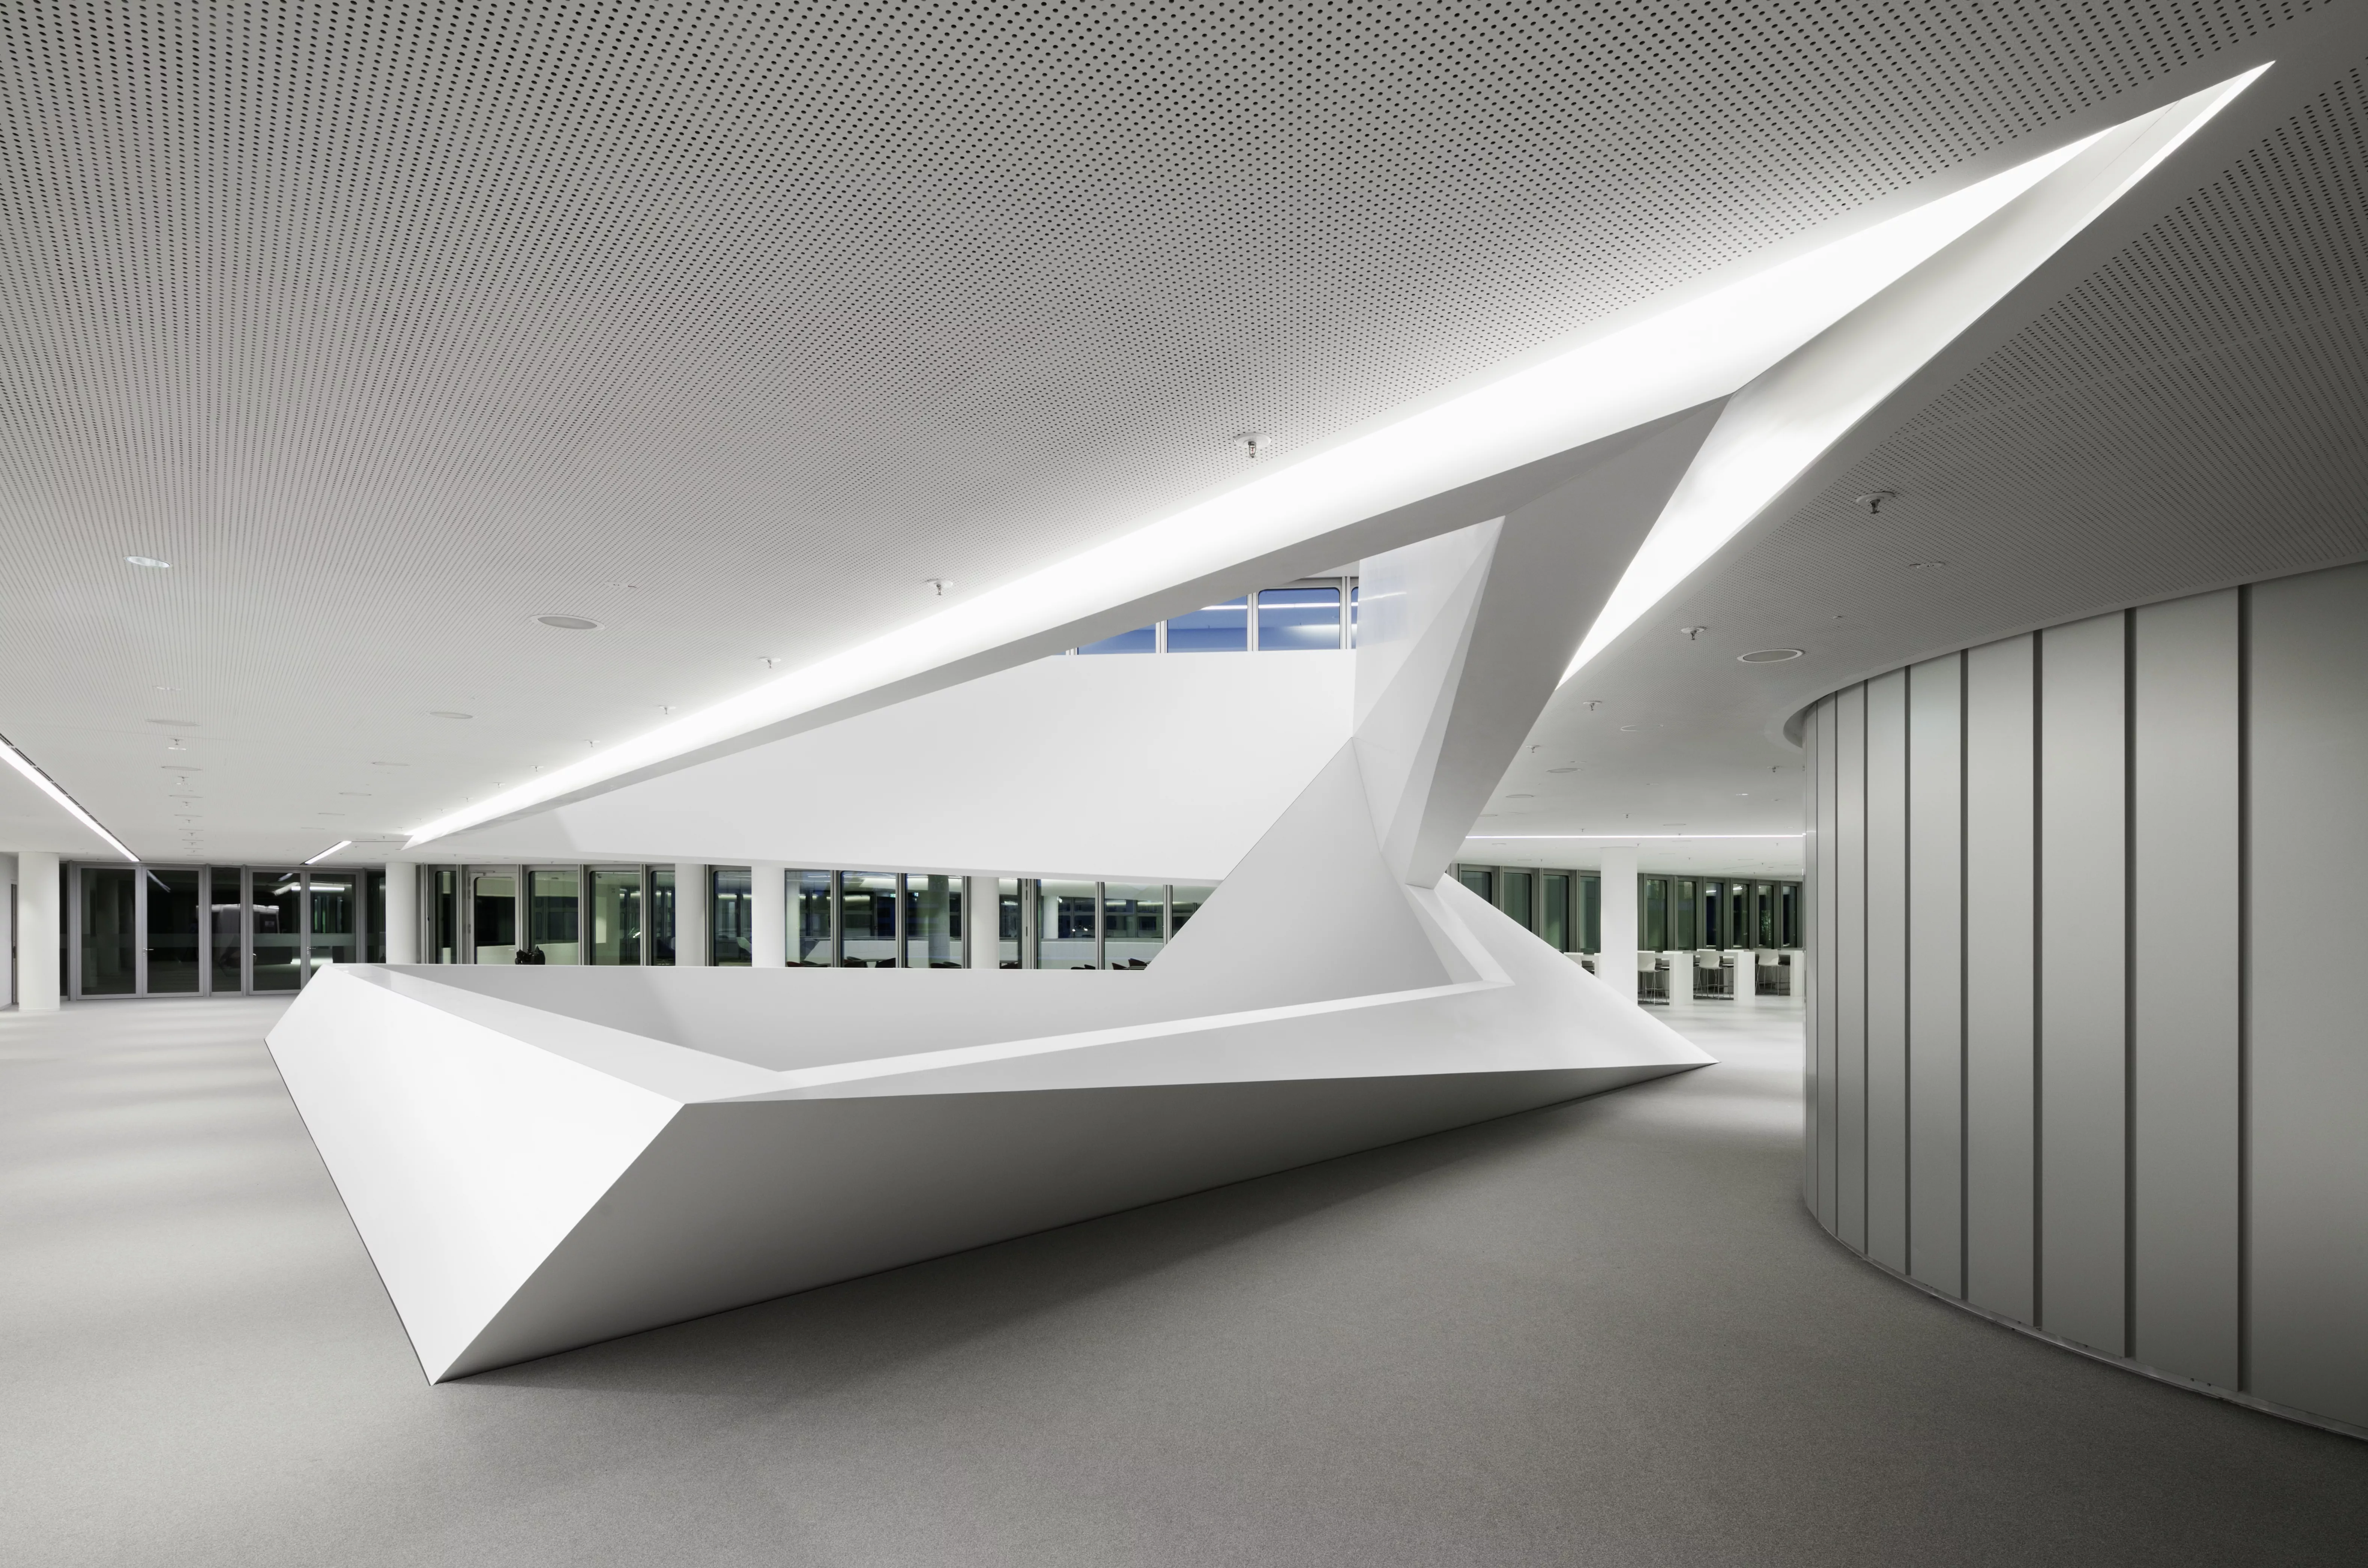 A new geometric dimension: The polygonal HIMACS structure in Munich's HVB-Tower